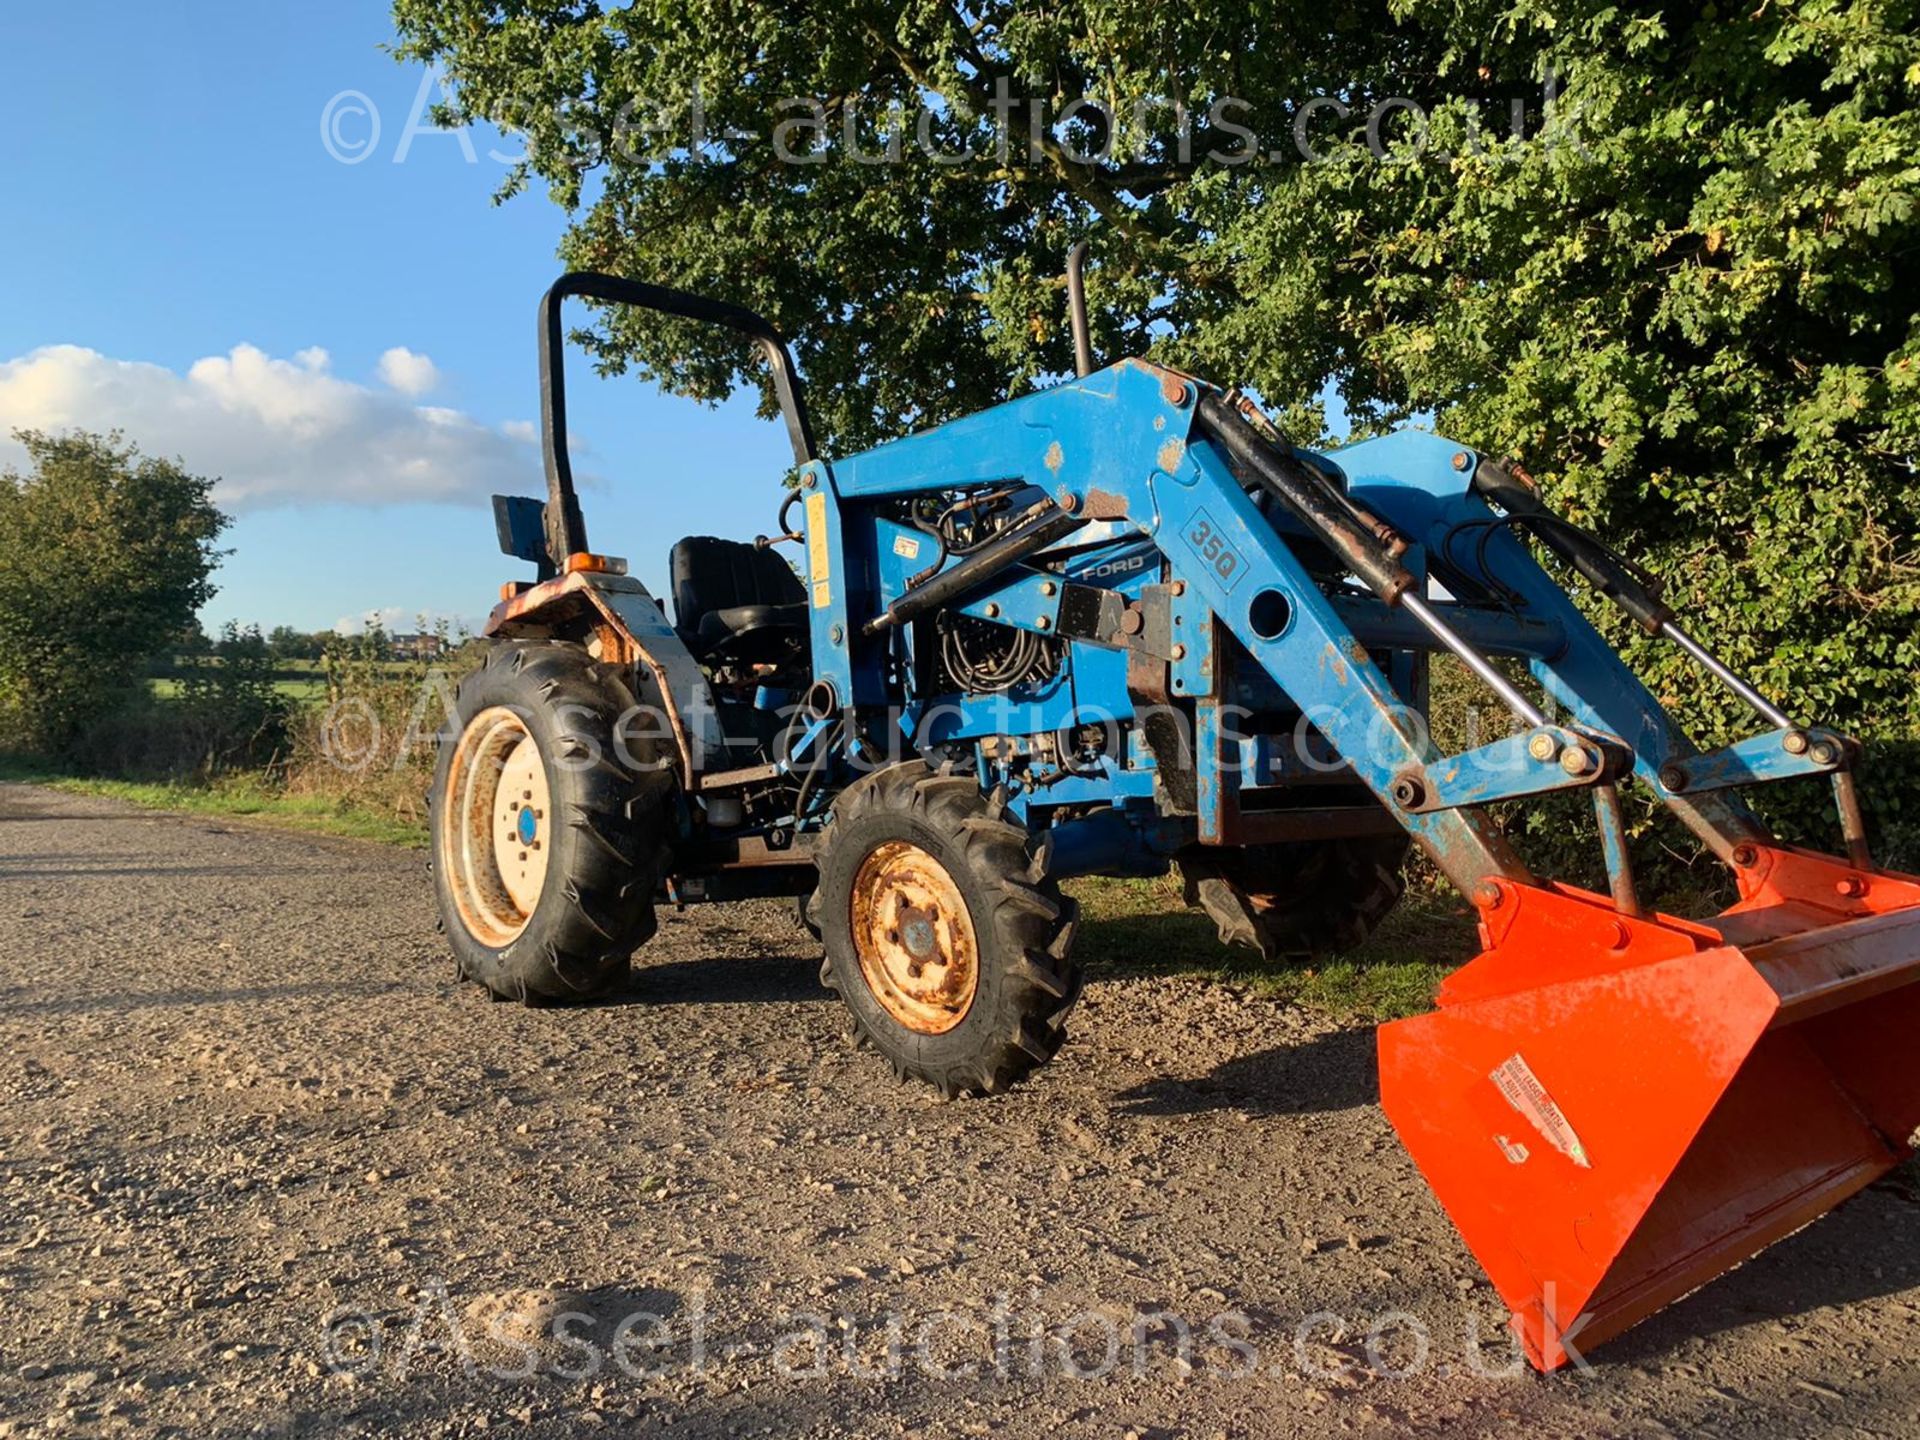 FORD 1720 28hp 4WD COMPACT TRACTOR WITH LEWIS 35Q FRONT LOADER AND BUCKET, RUNS DRIVES LIFTS WELL - Image 2 of 11